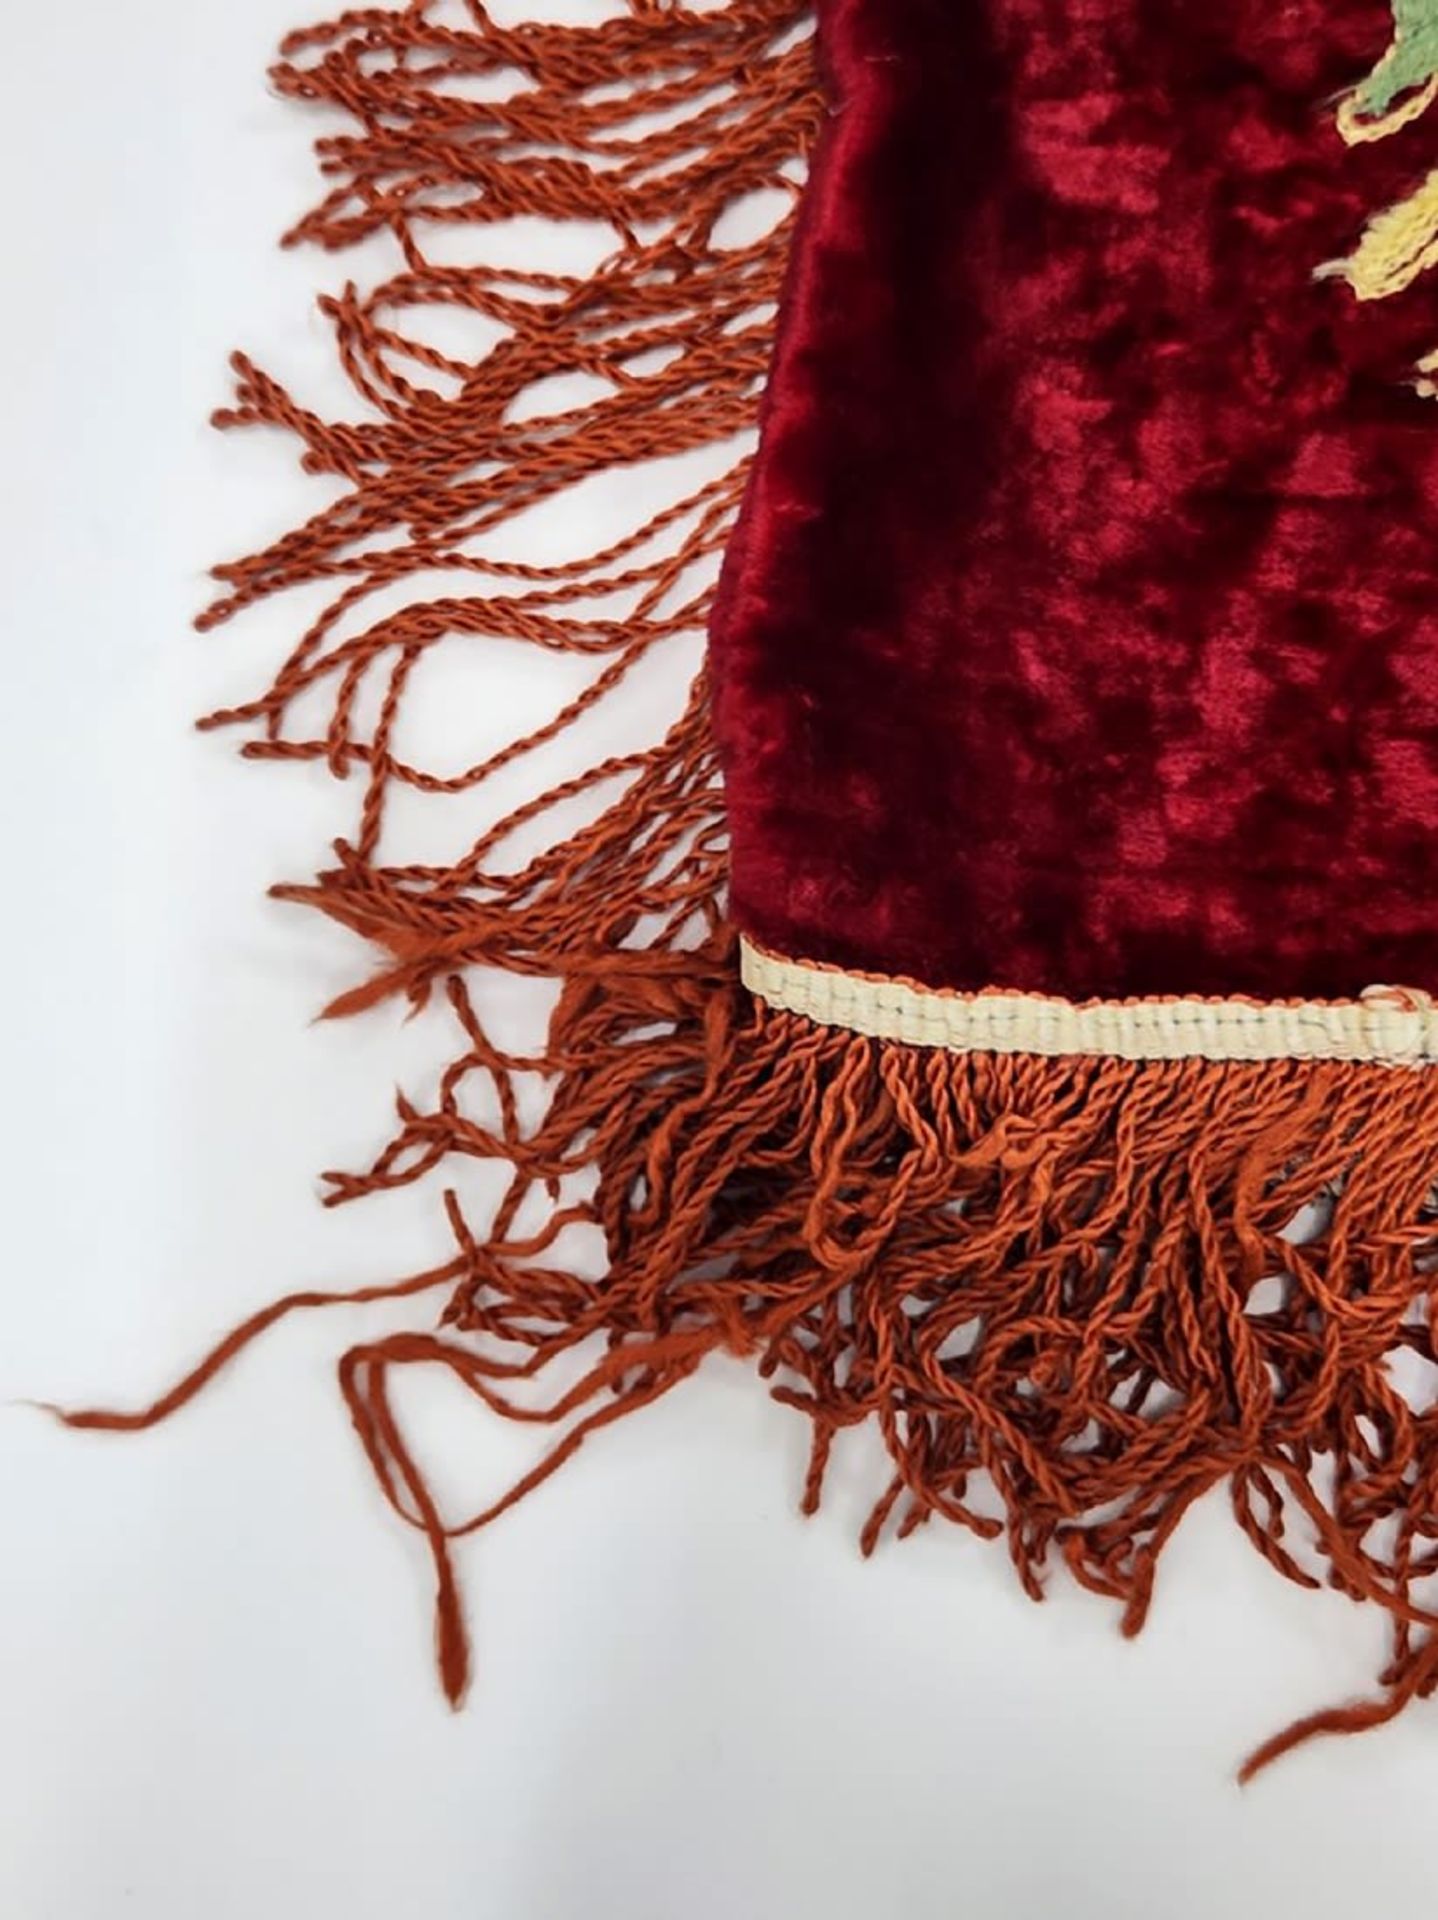 A Torah scroll coat, decorated with cotton thread weaving on red velvet and red fabric strands, - Image 5 of 7